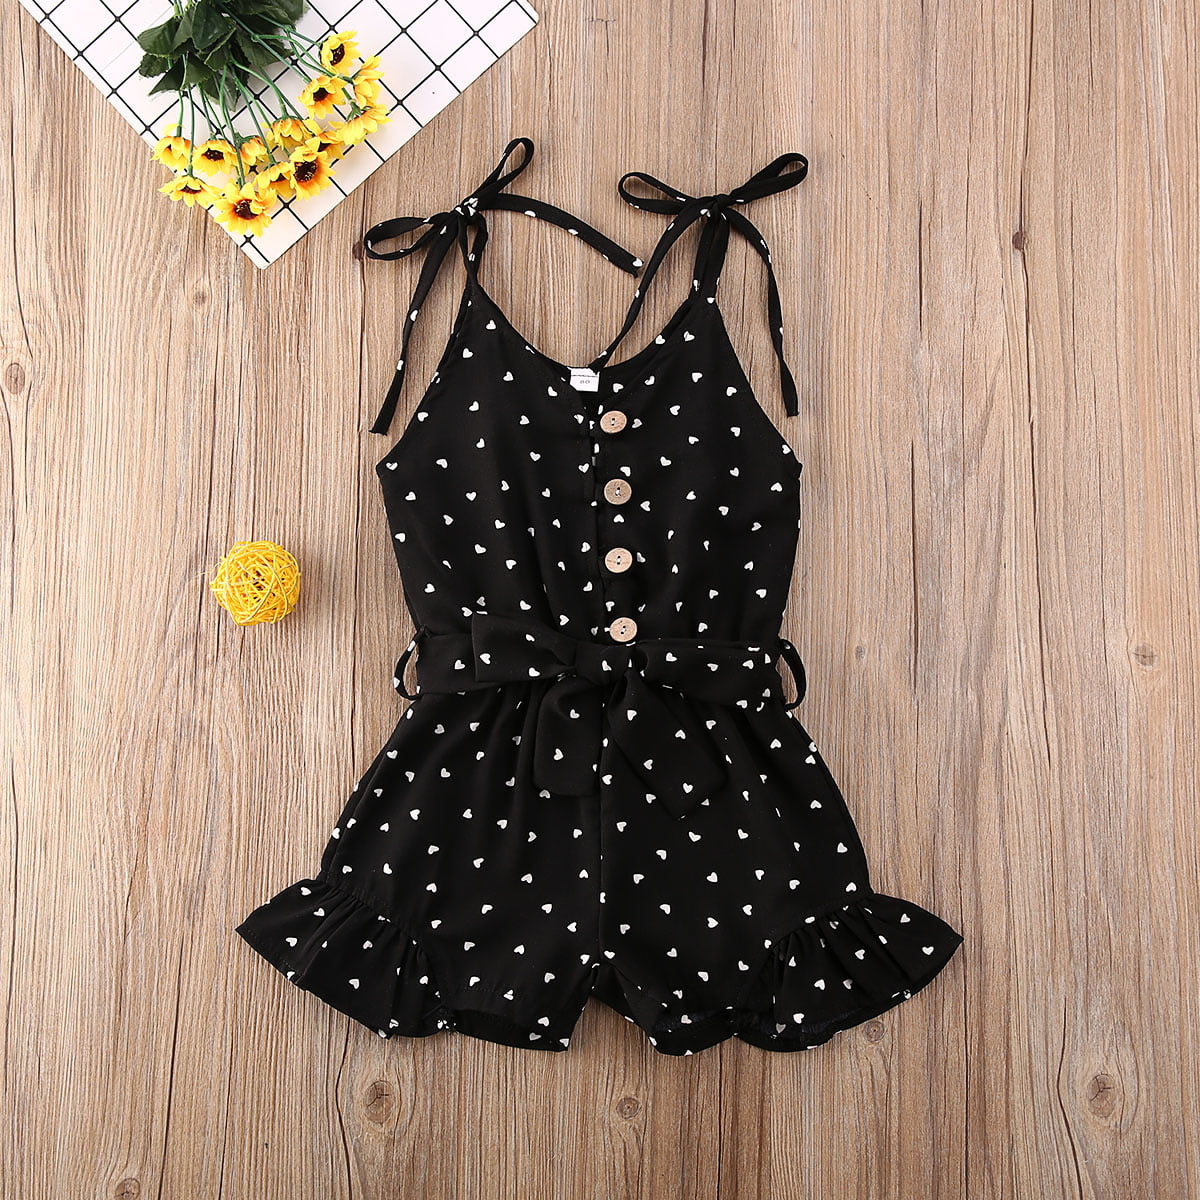 Jumpsuits & Co-ords | Price Drop- Sexy Short Polka Dot Jumpsuit Boohoo  Brand | Freeup